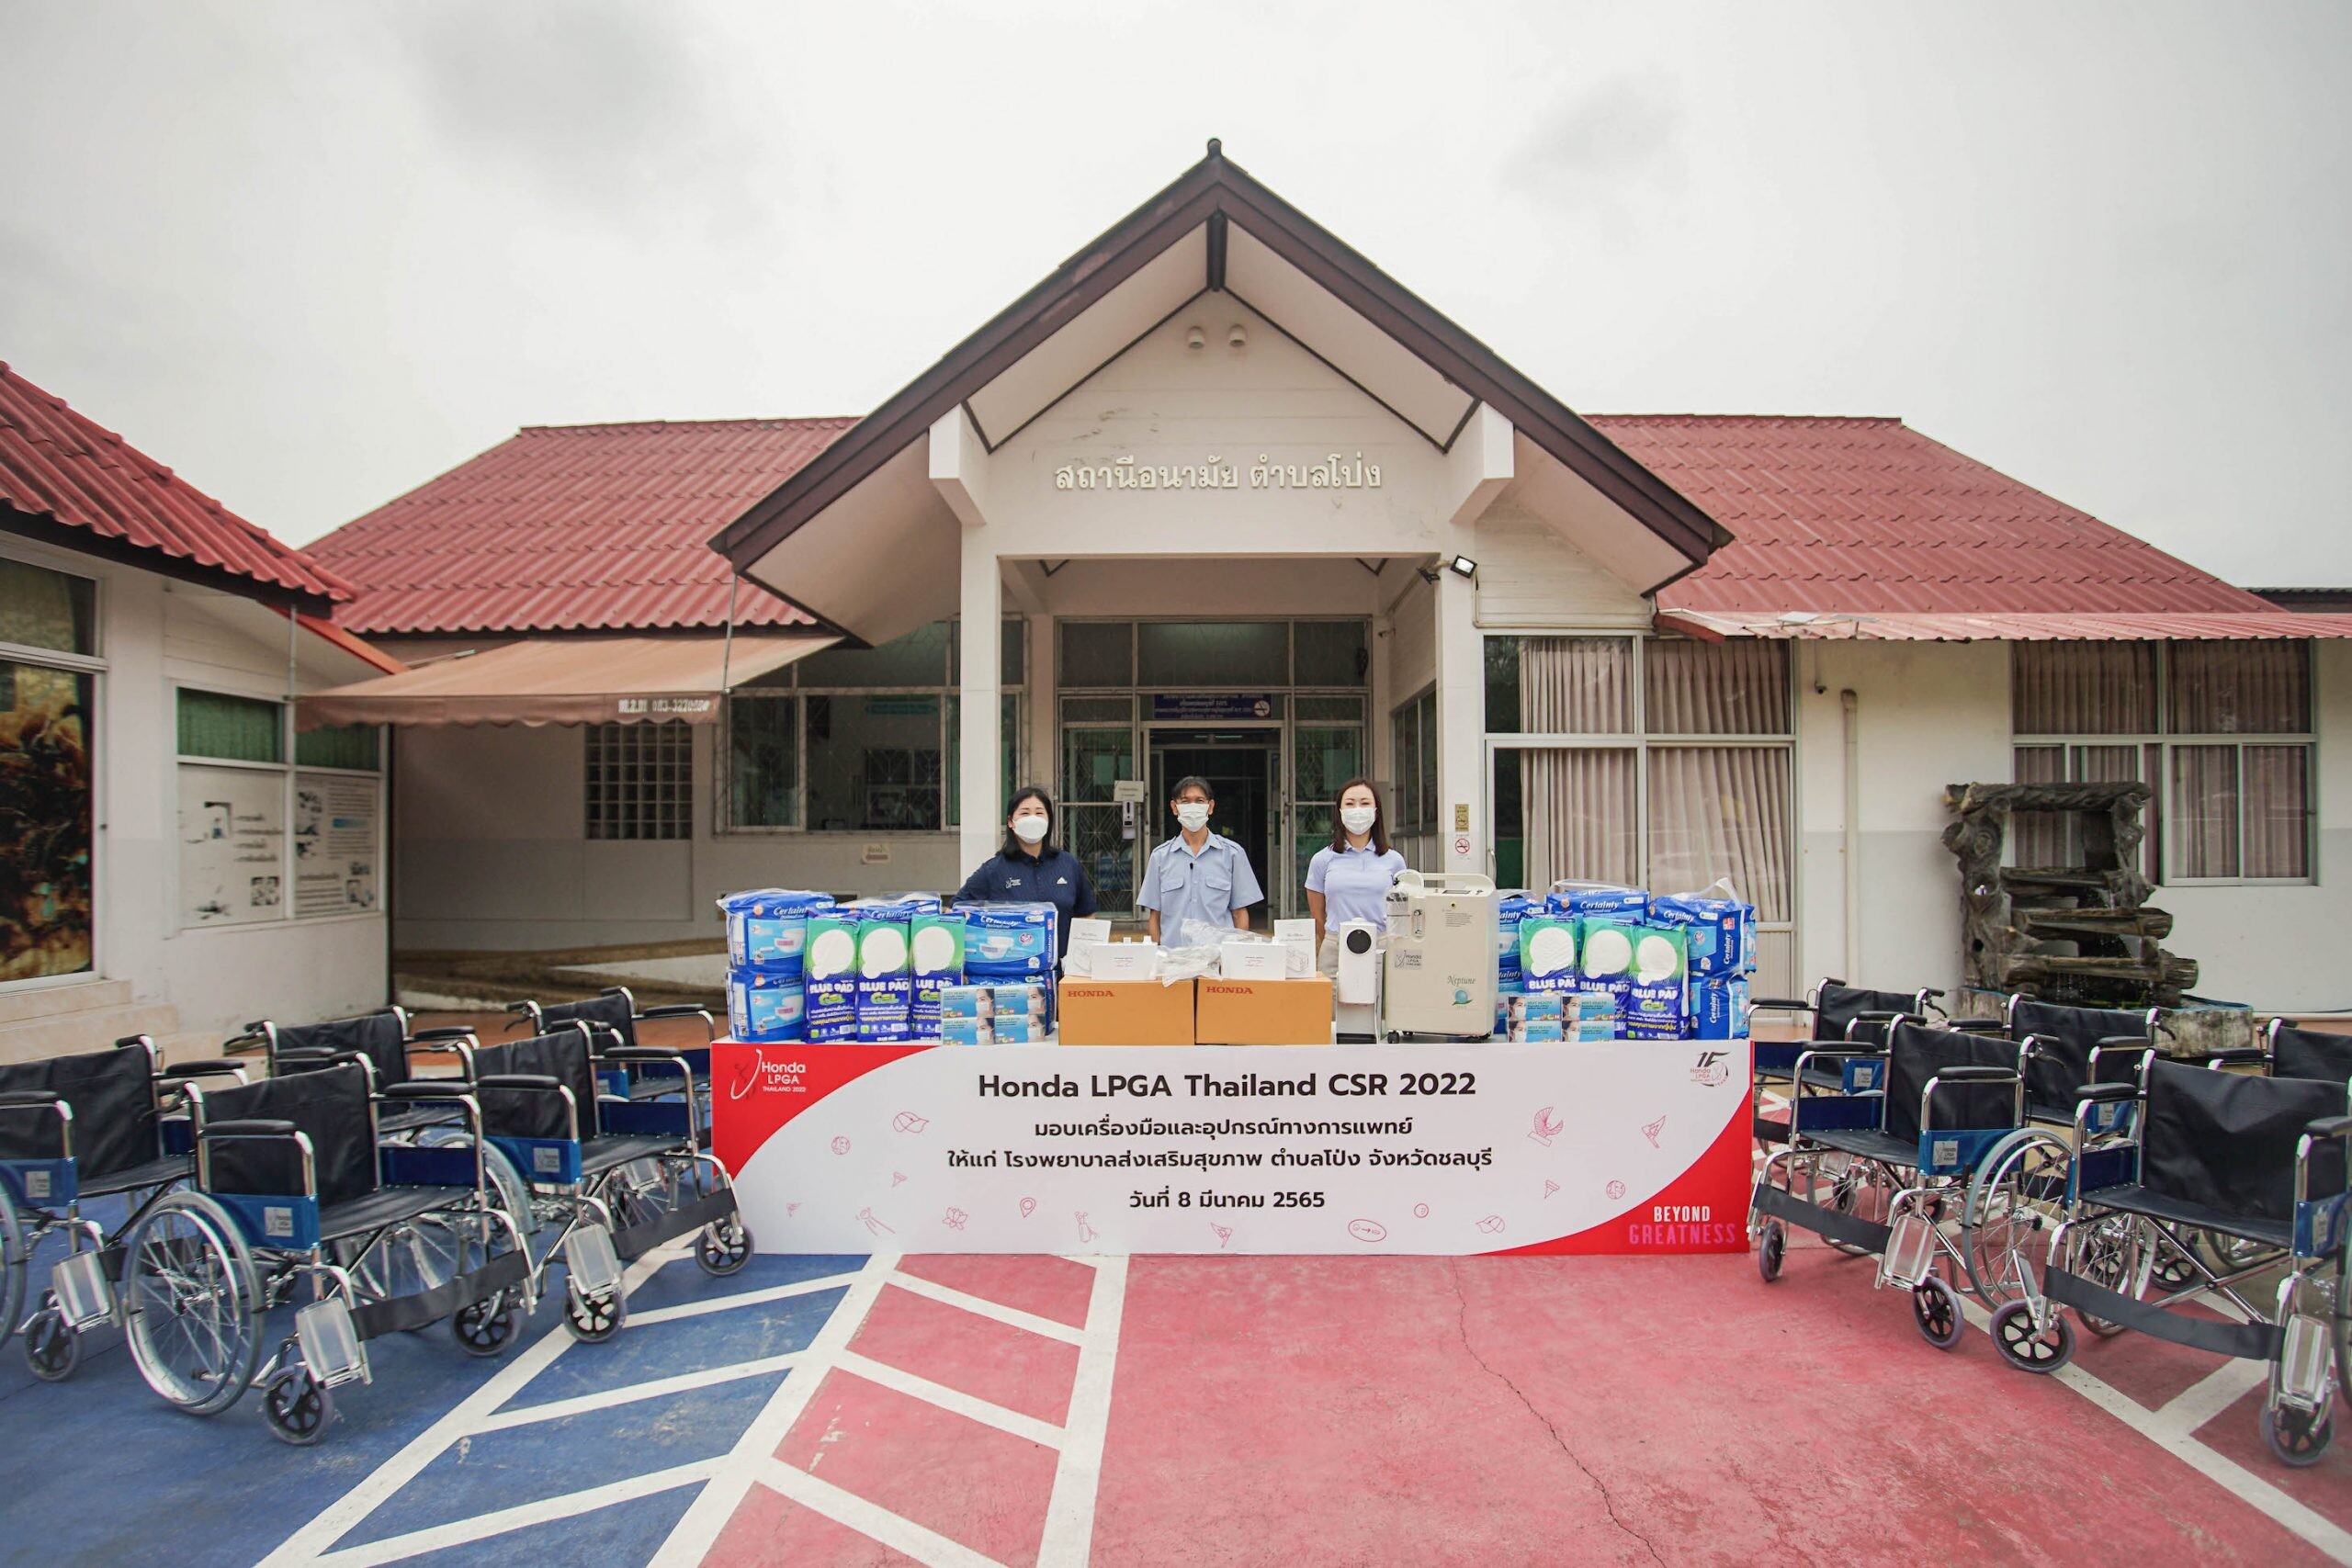 Pong Primary Medical Receive Medical Equipment including "Negative and Positive Pressure Mask" Medical Innovations by Honda Engineers from Honda LPGA Thailand 2022 Efforts